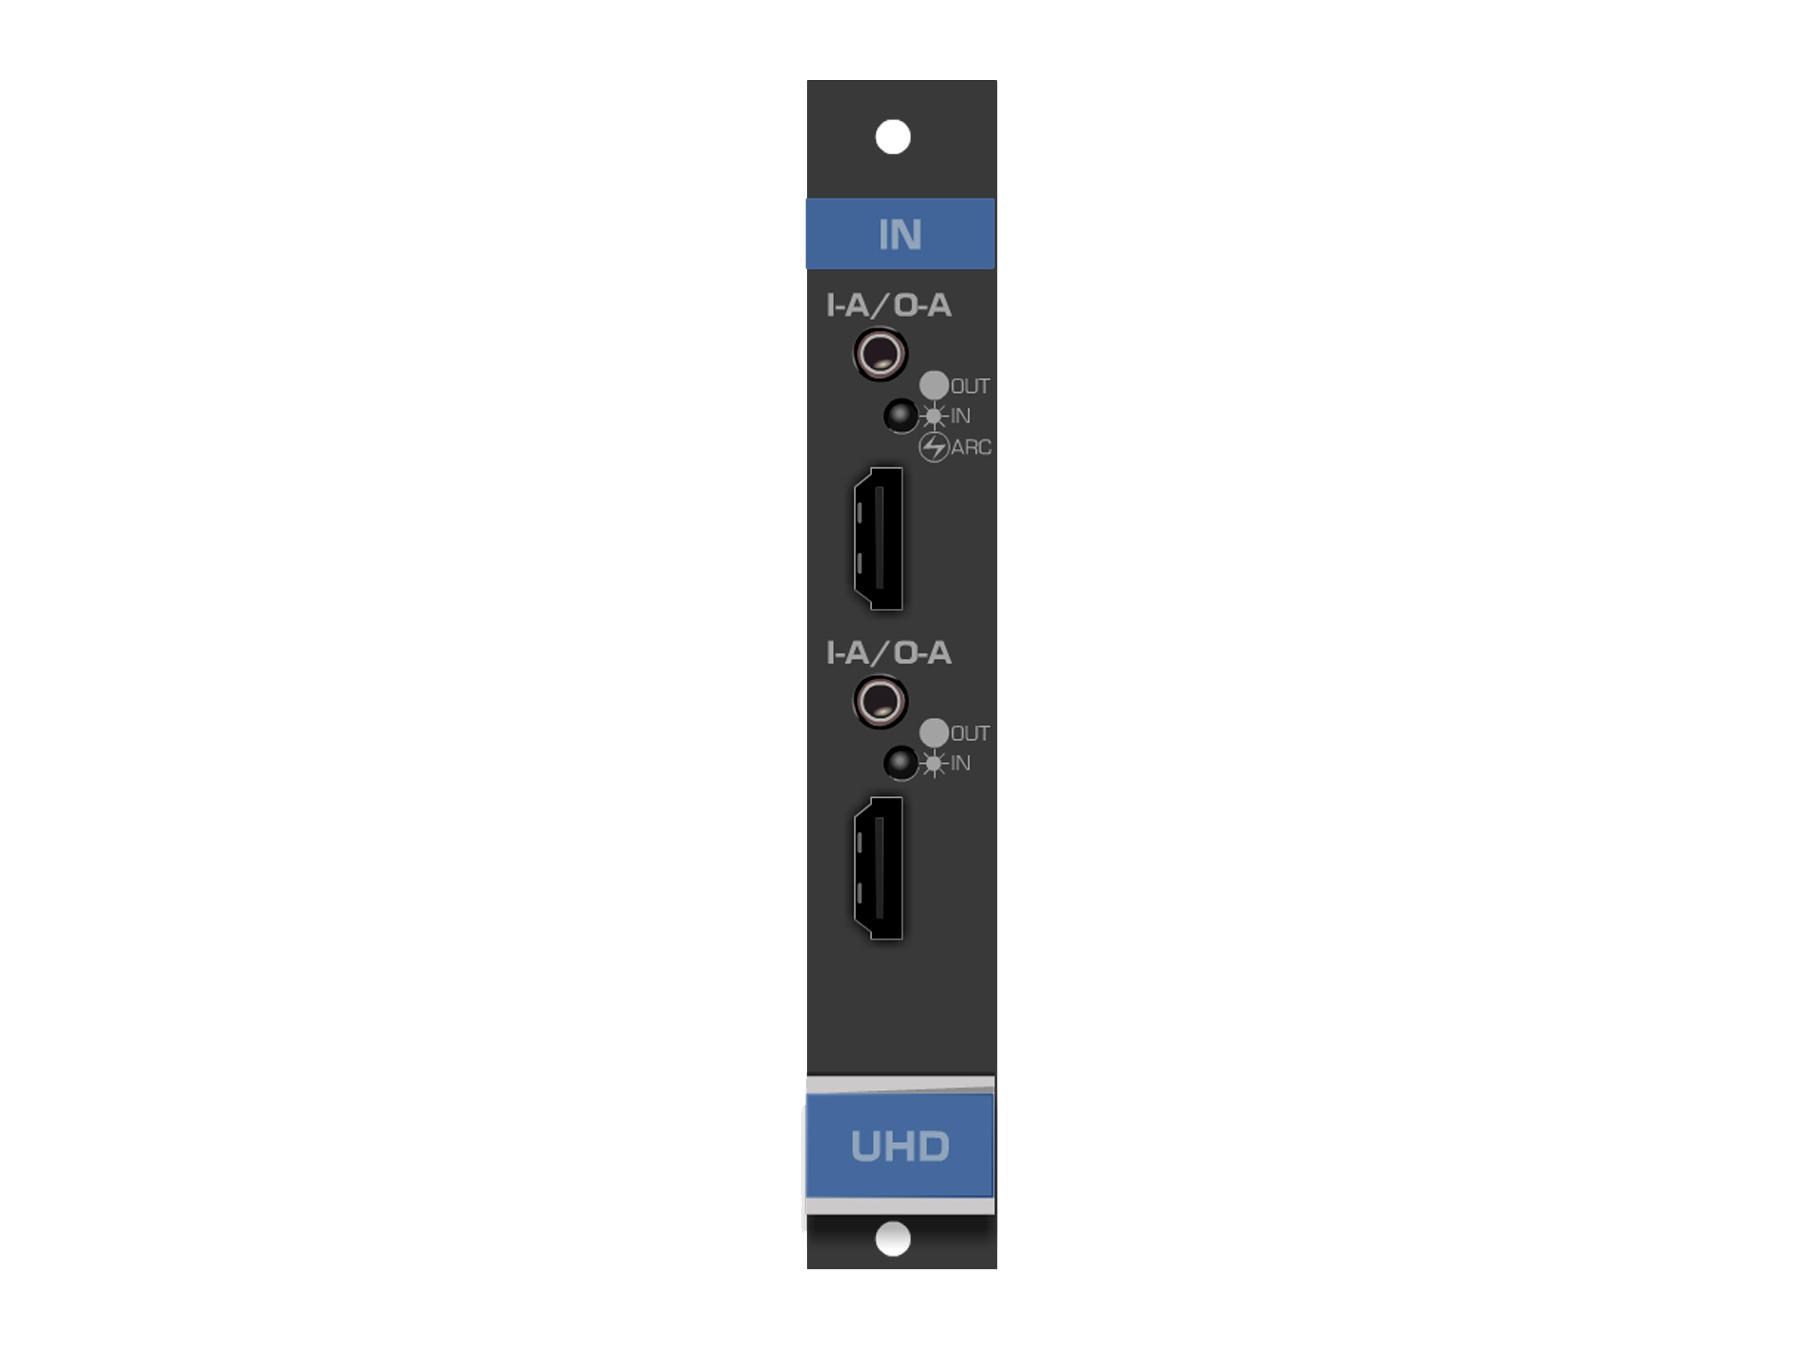 UHDA-IN2-F16 2-Input 4K HDMI with Selectable Analog Audio Card for VS-1616D Matrix Switcher (F-16) by Kramer